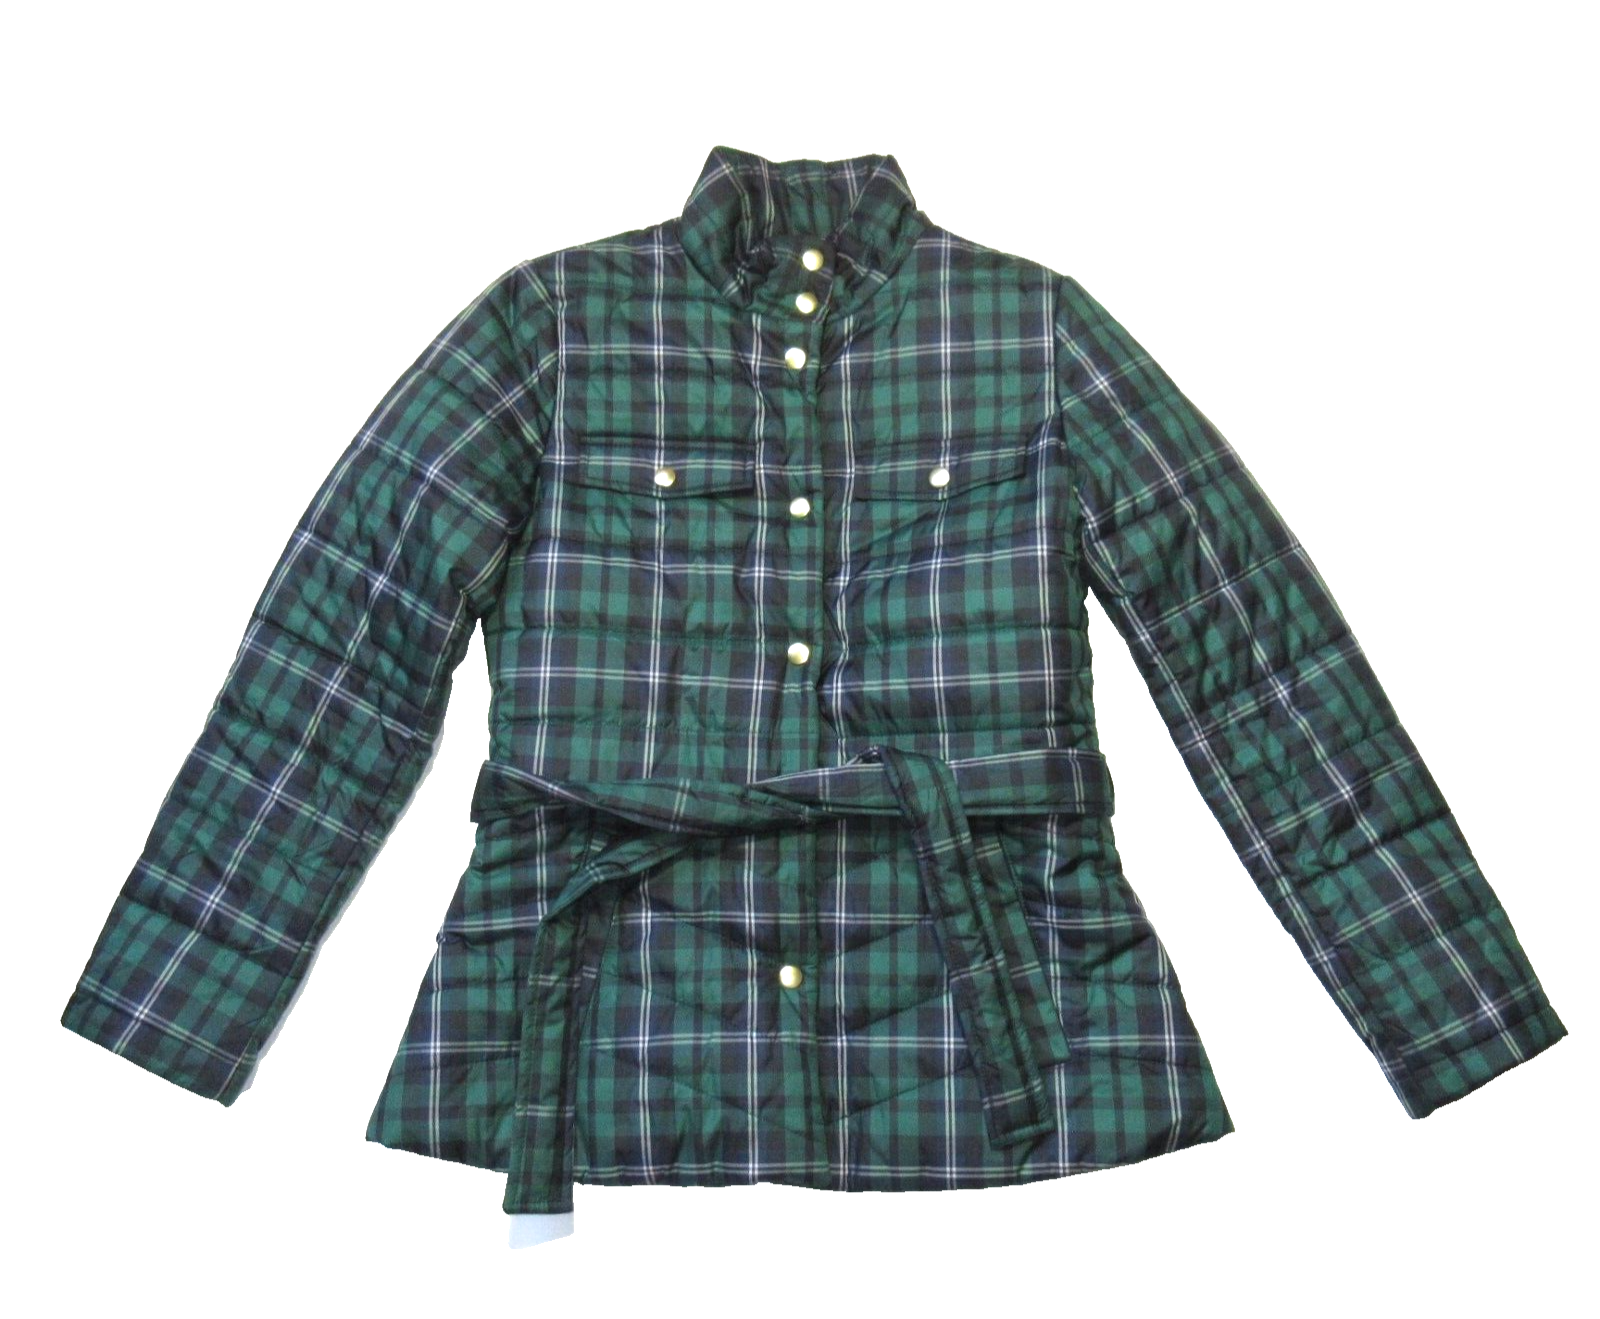 Primary image for NWT J.Crew Plaid Belted Puffer Jacket in Navy Green White Plaid Belted XS